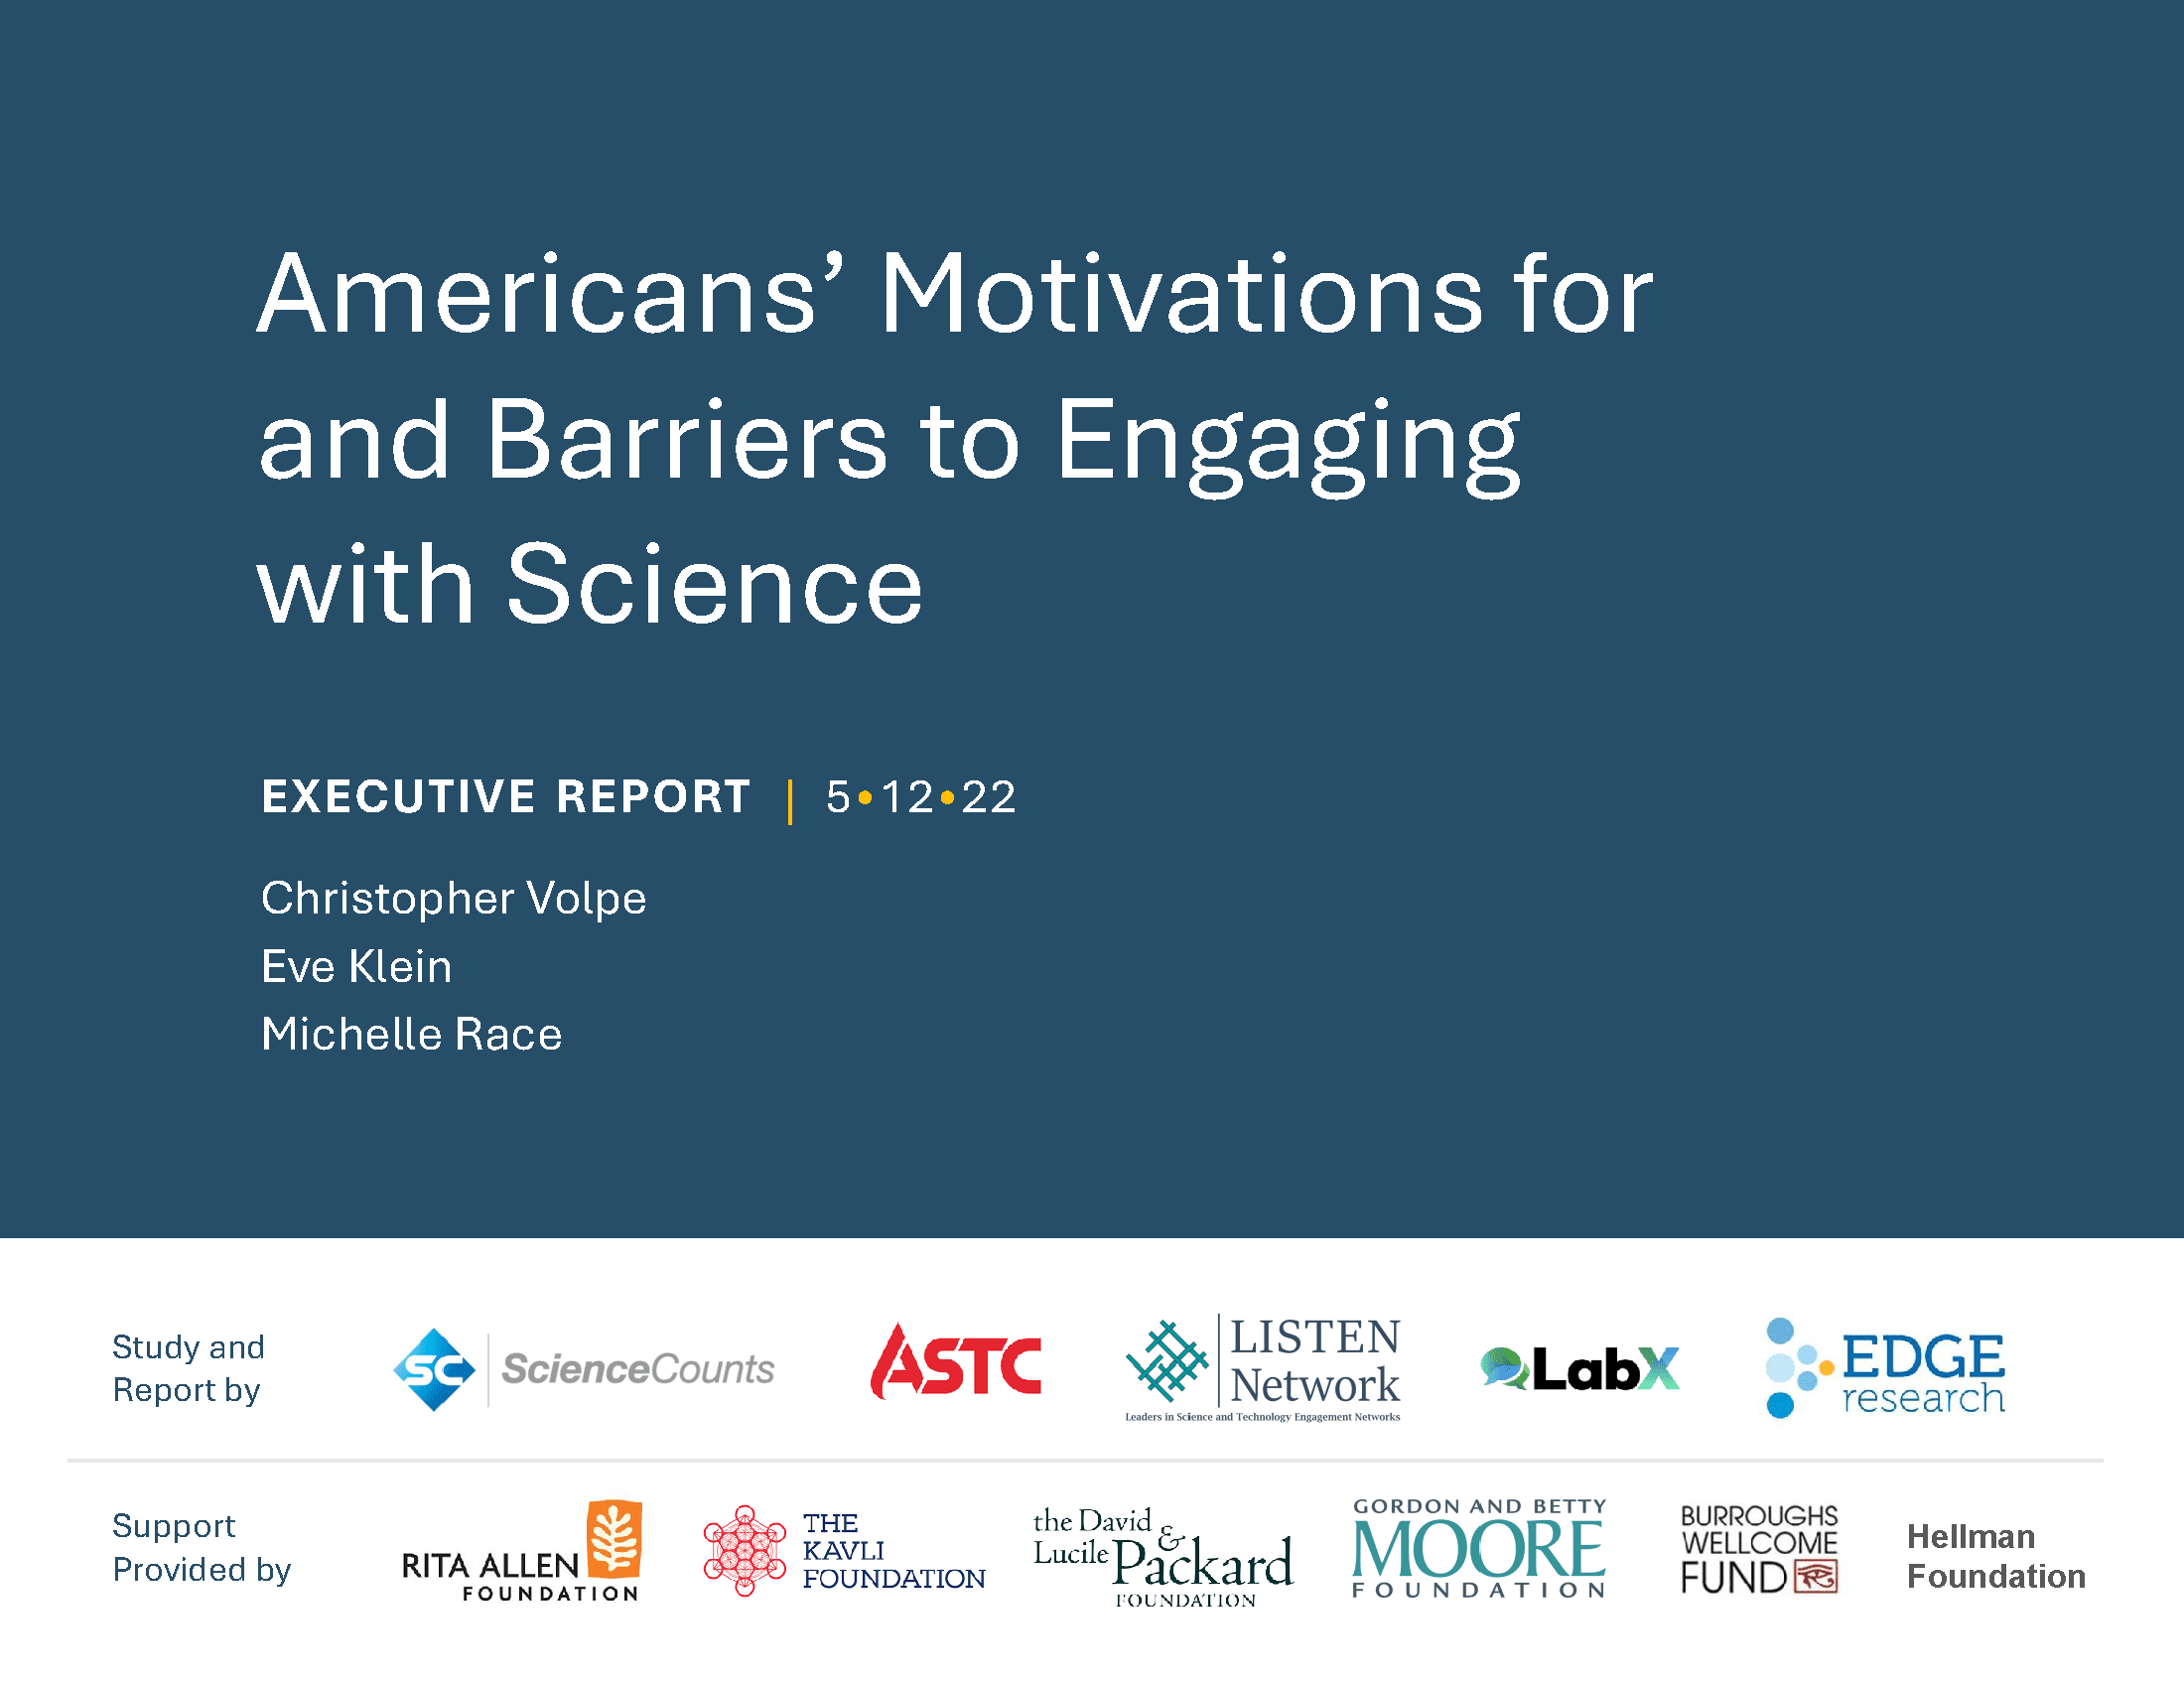 Cover Image: Americans' Motivations and Barriers to Engaging with Science